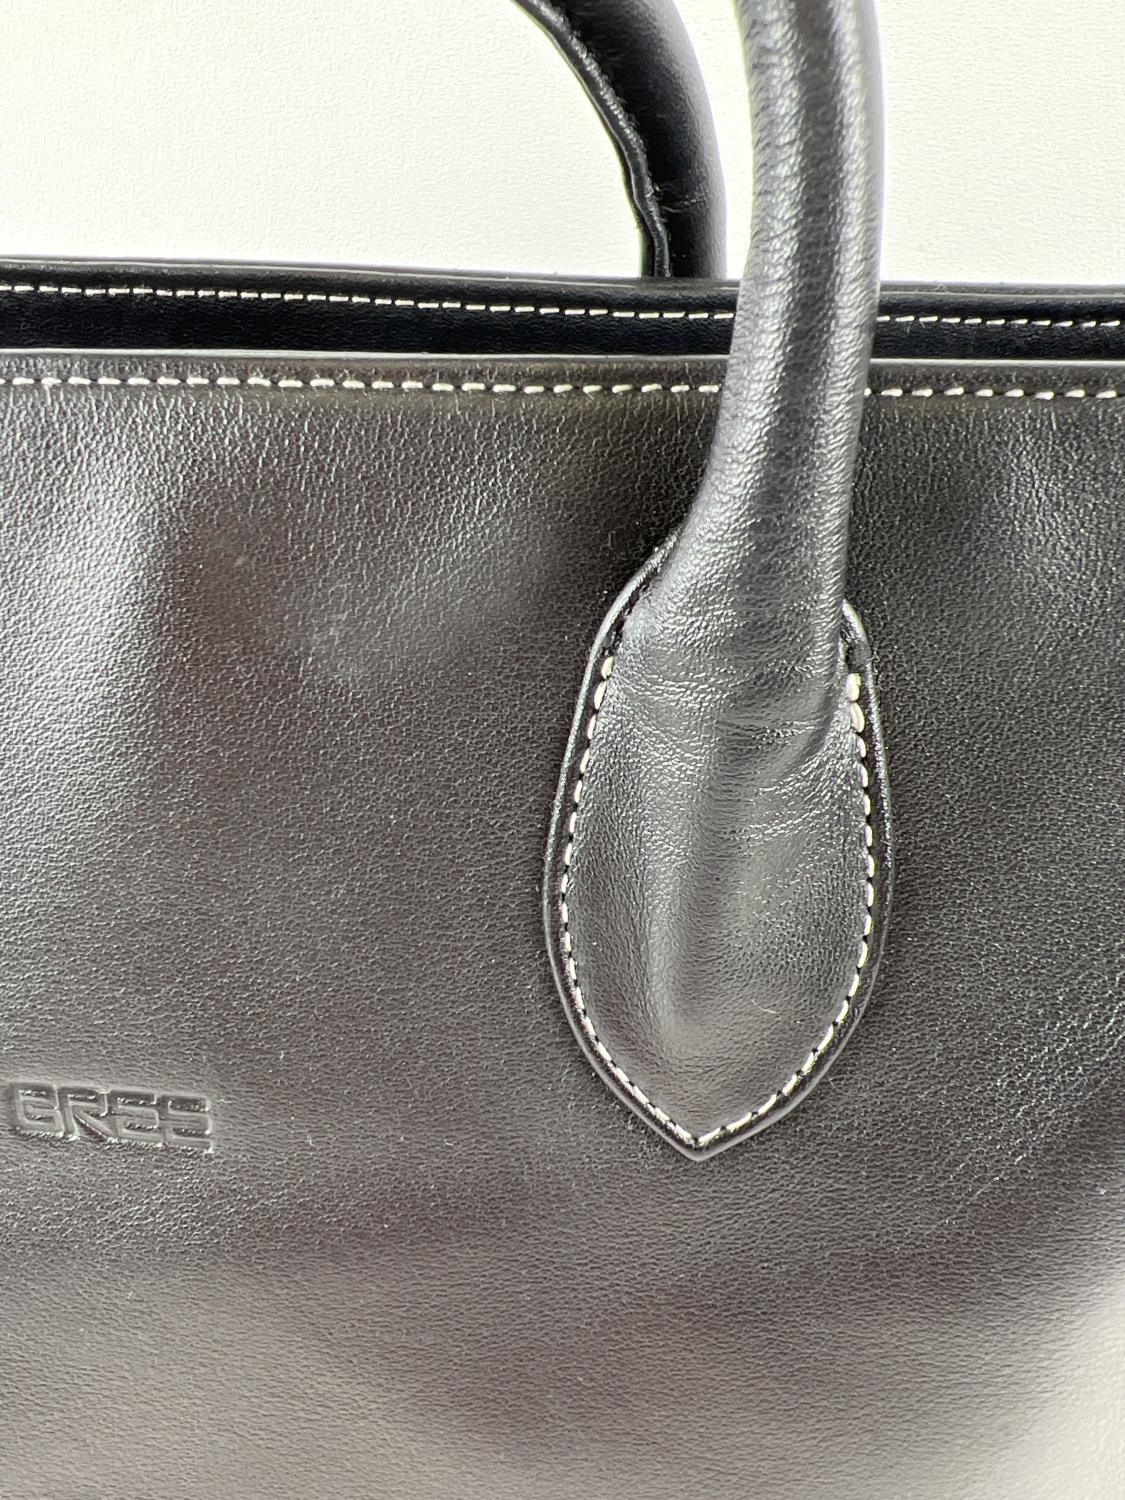 A soft black leather laptop tote work bag by Bree. Complete with detachable shoulder strap. Black - Image 3 of 7